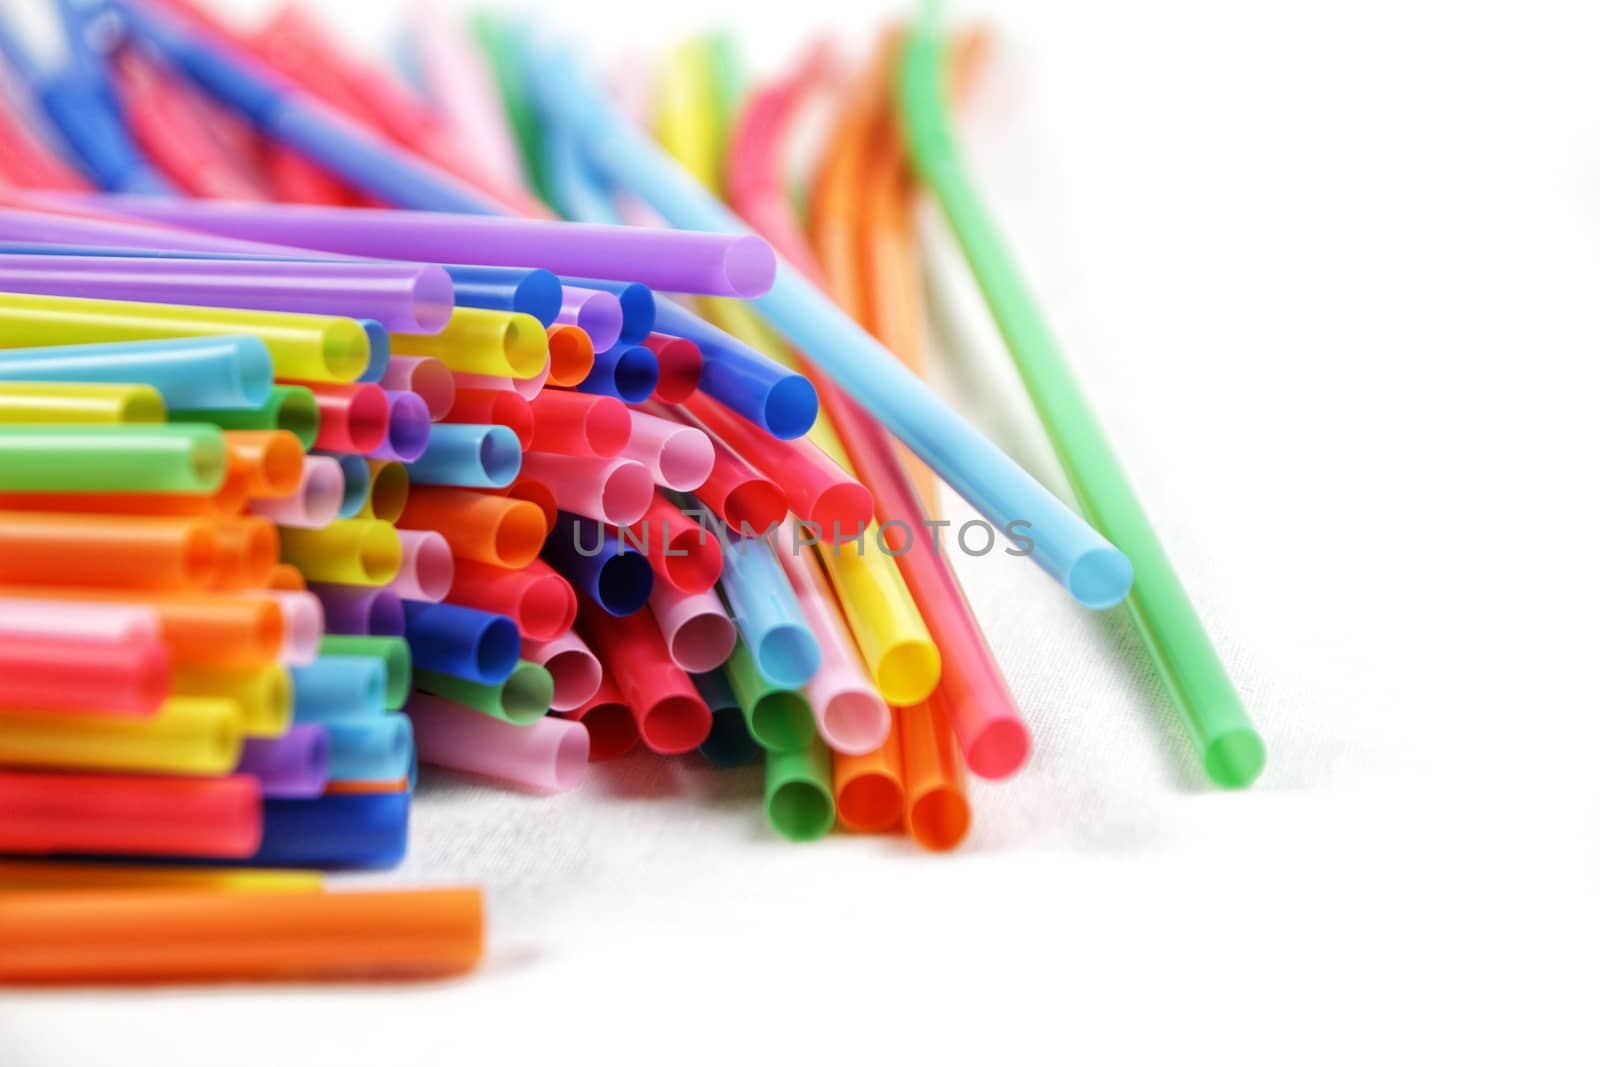 Colorful plastic drinking straws close up by soniabonet